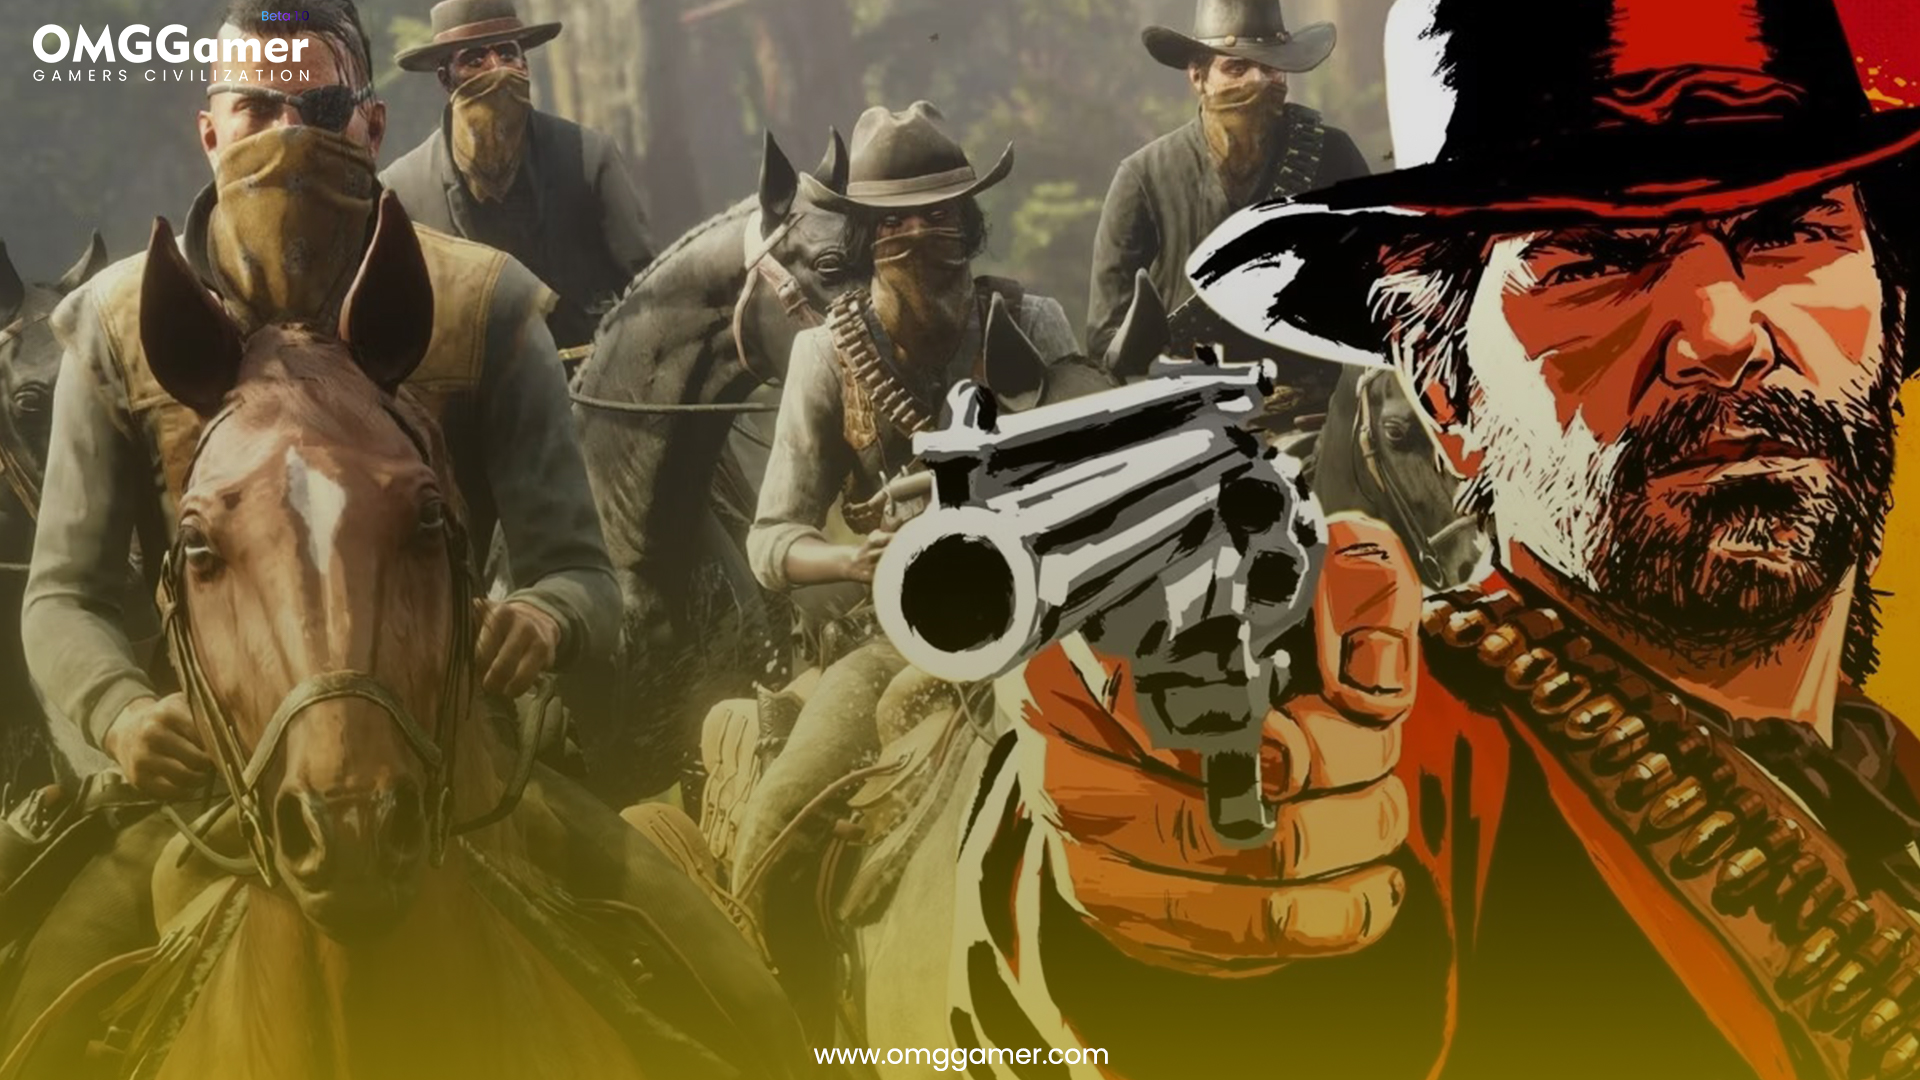 8 Things We Want in Red Dead Redemption 3 [RDR 3]